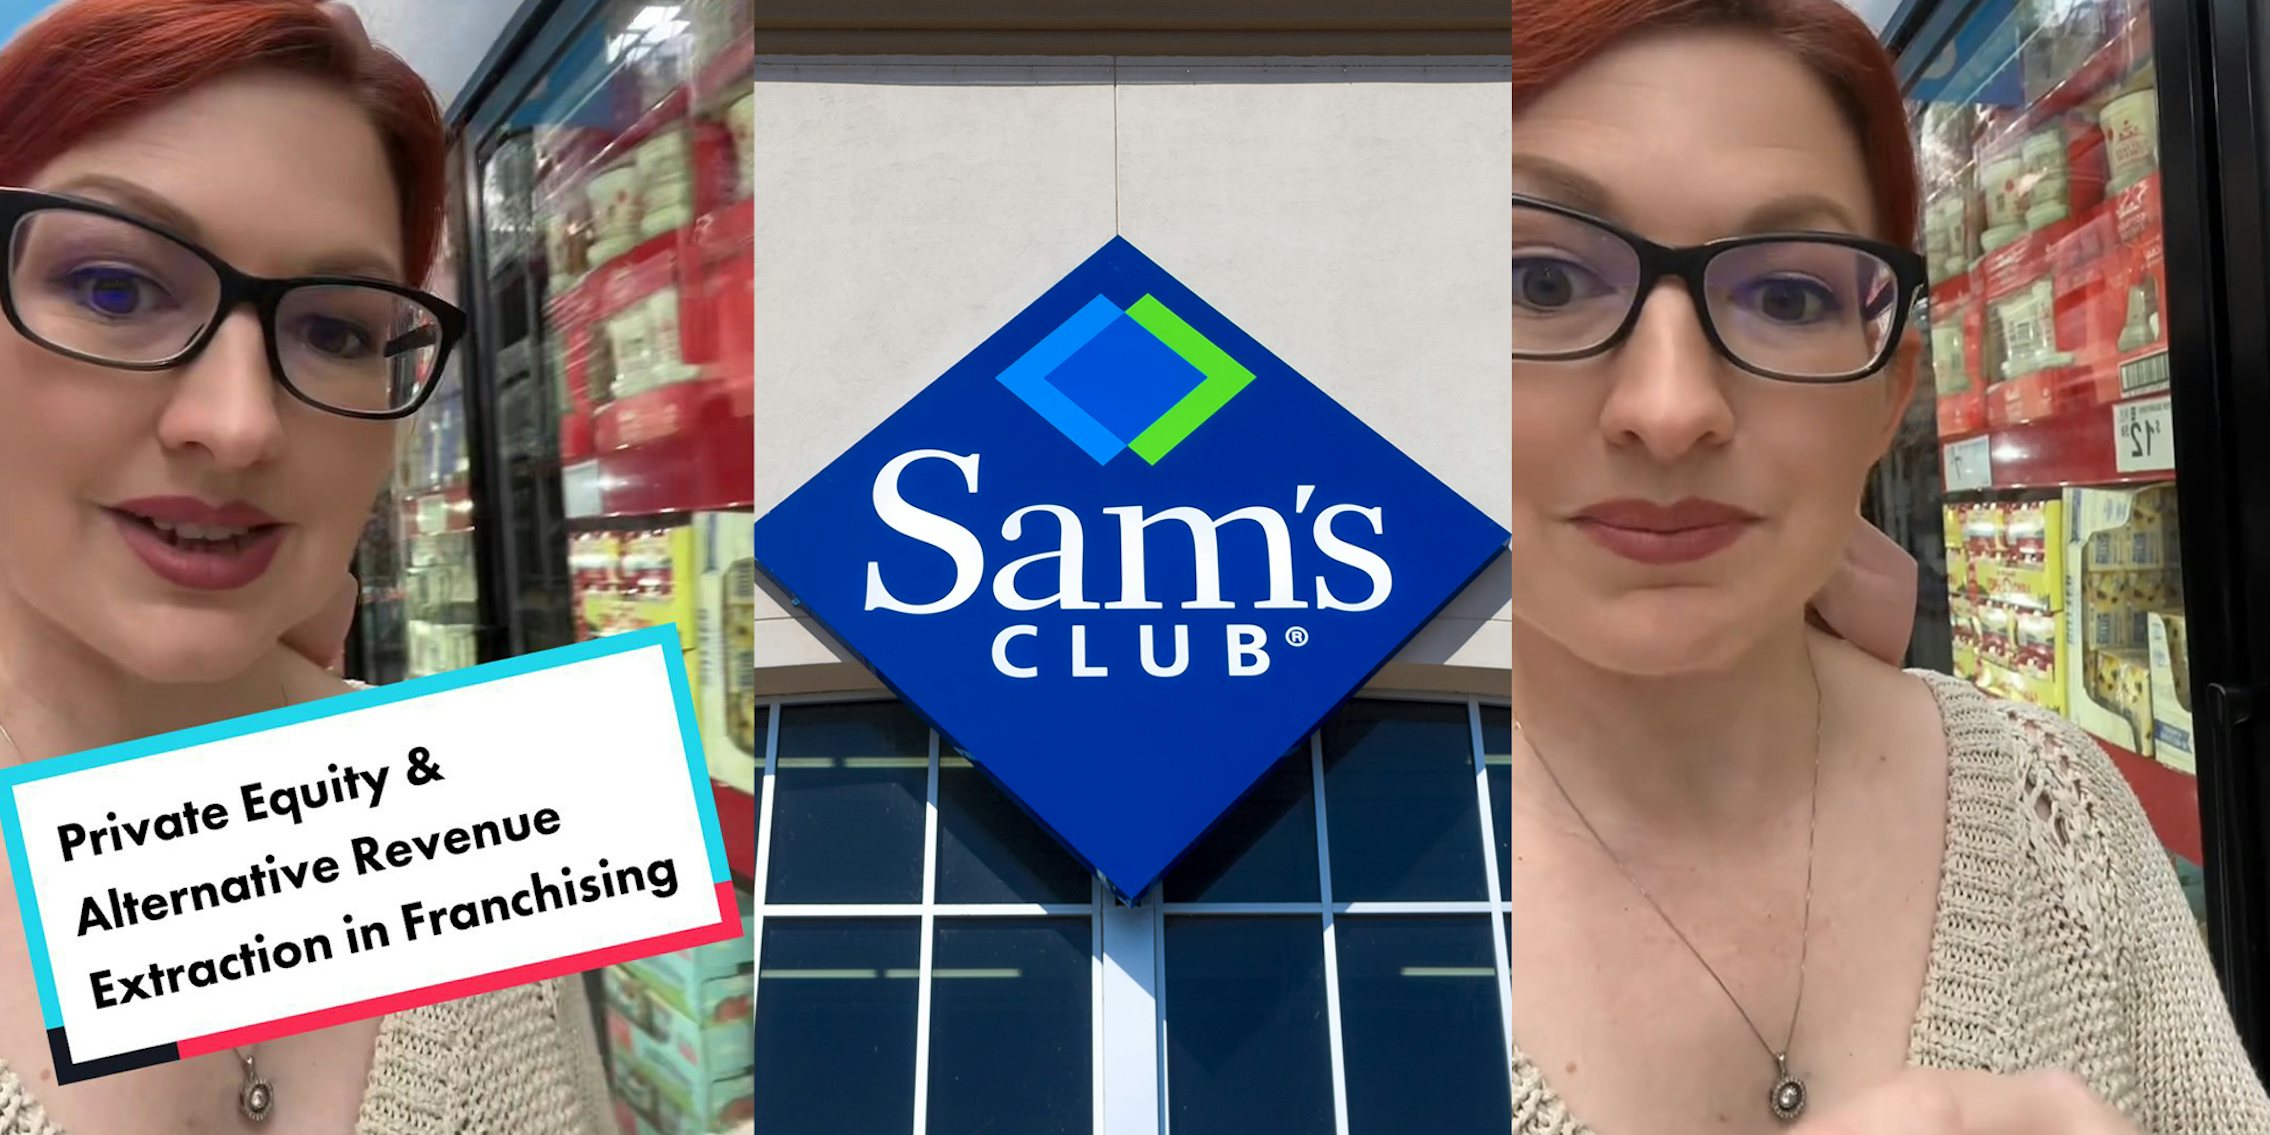 Sam's Club customer says Cinnabon stores suffer when their products get sold at grocery